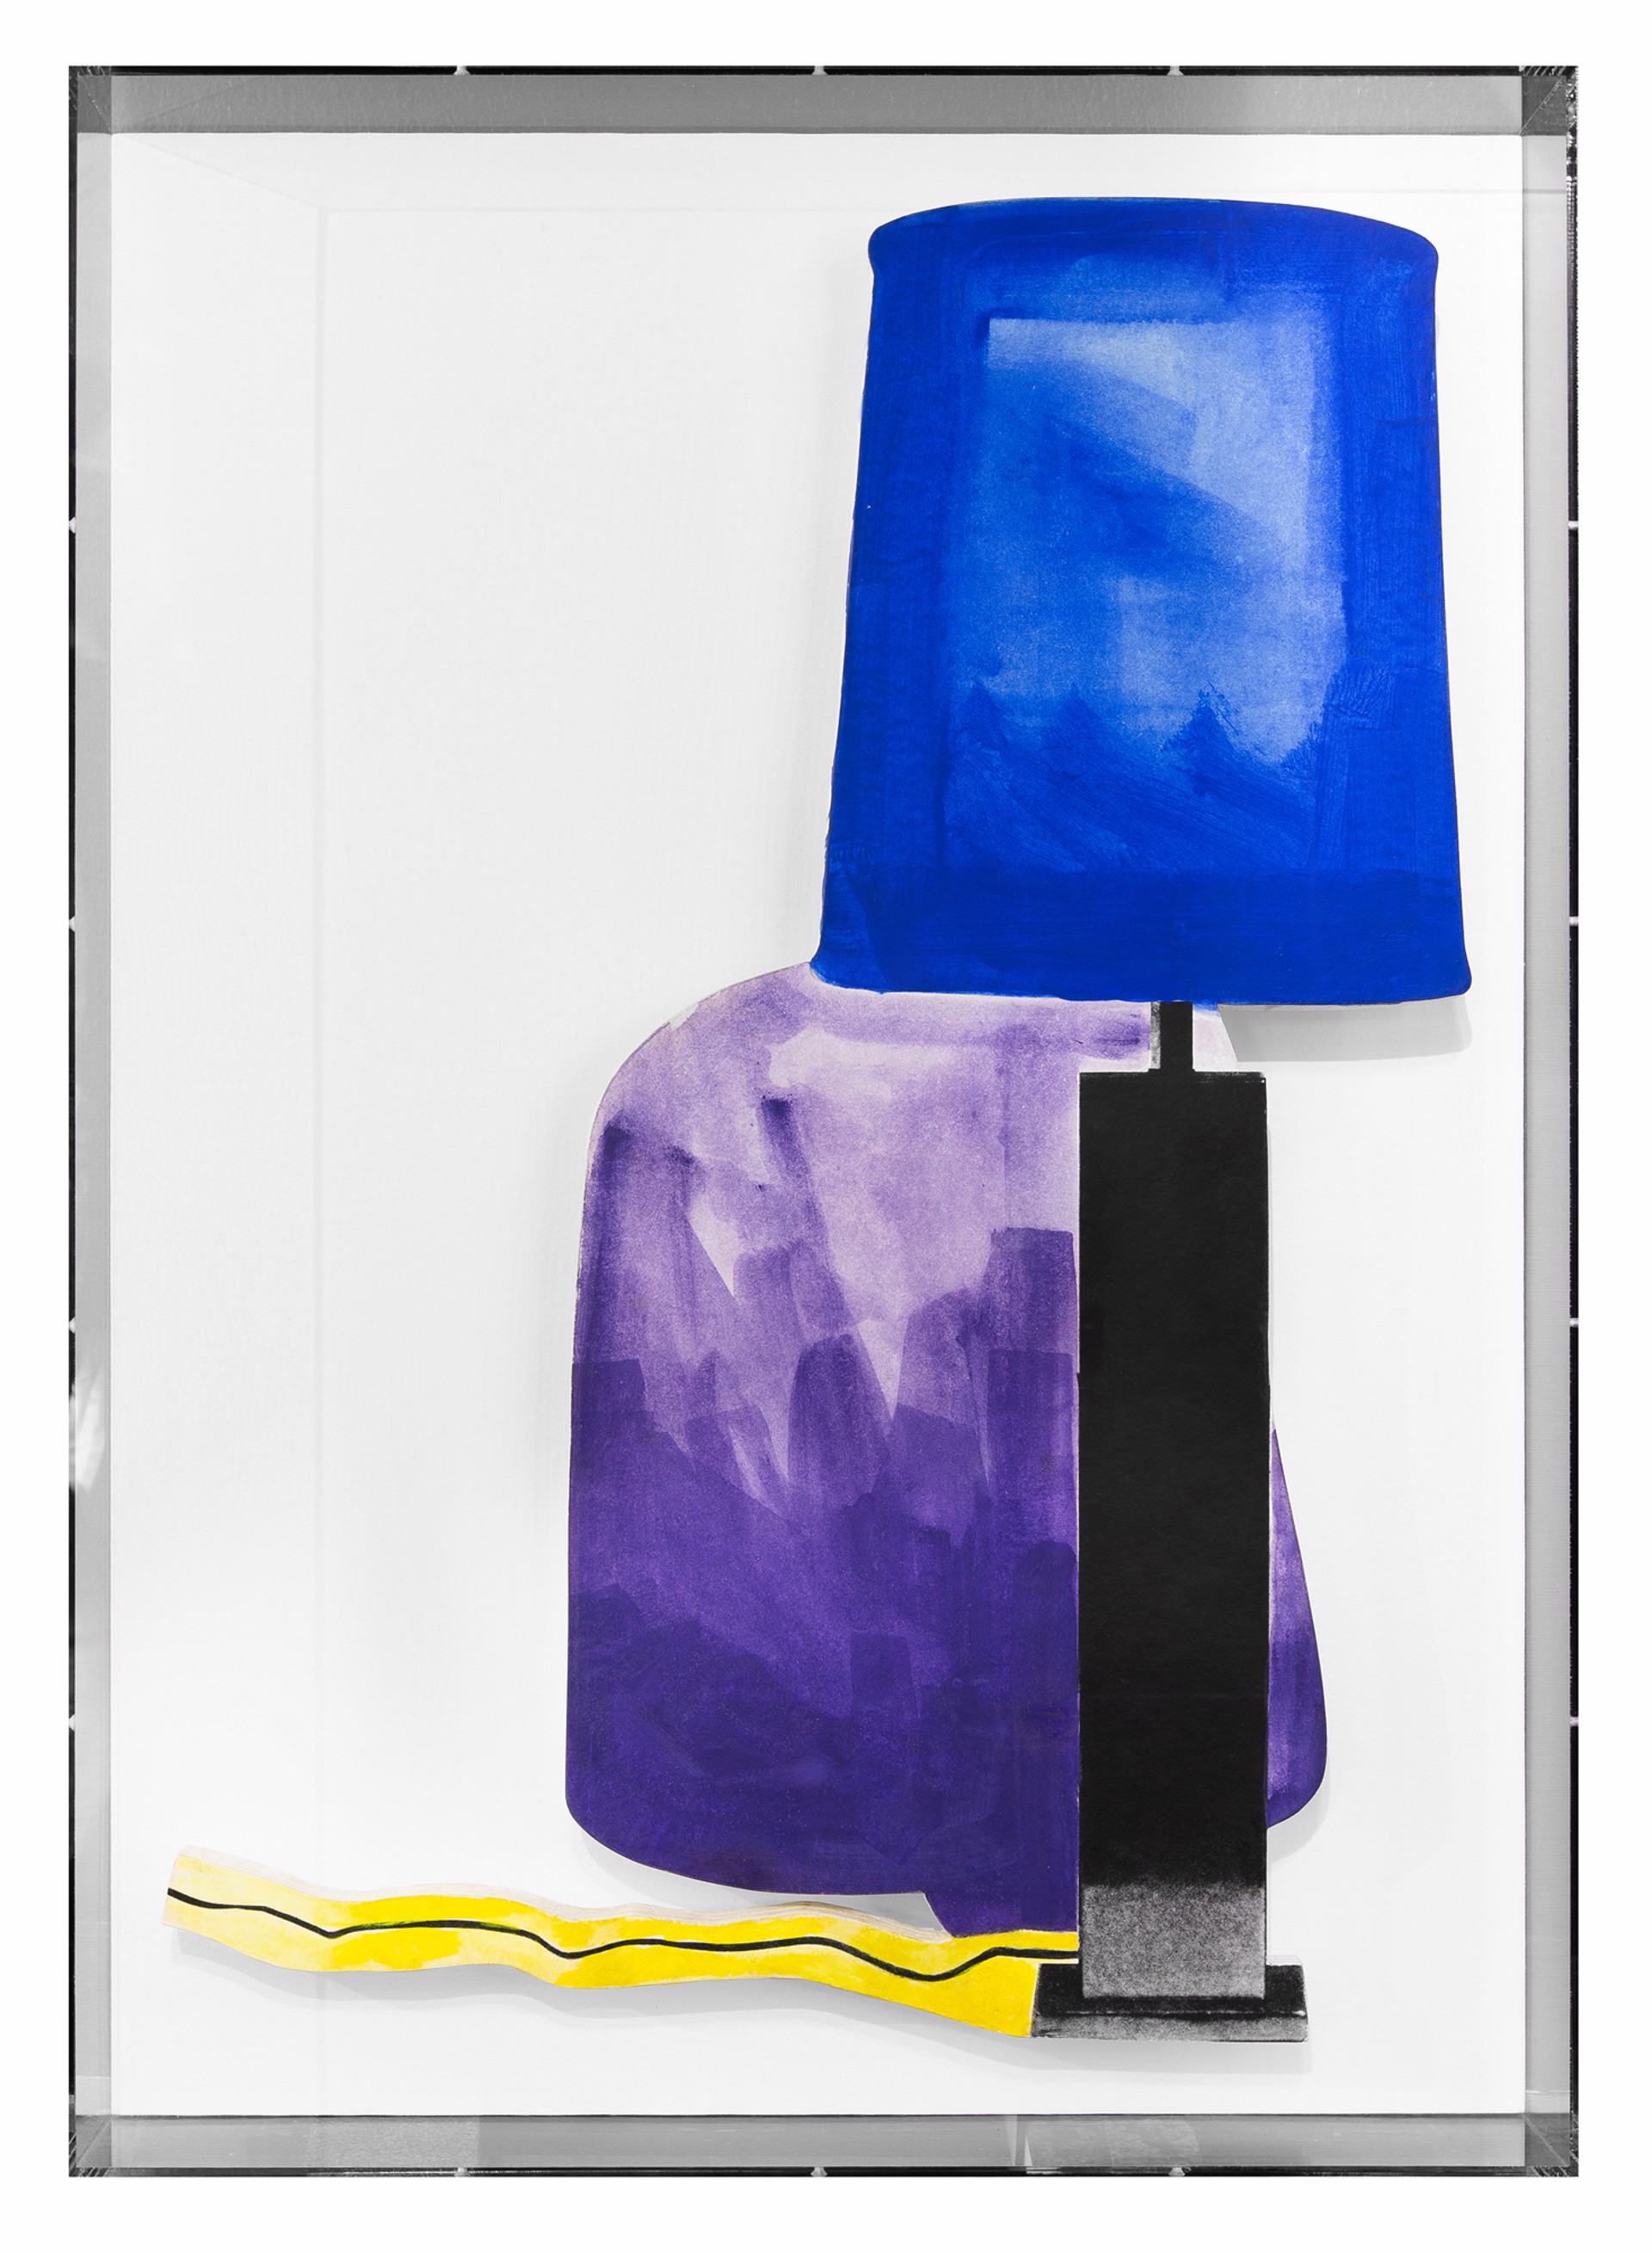 Table Lamp and It's Shadows (A1-A6) by John Baldessari